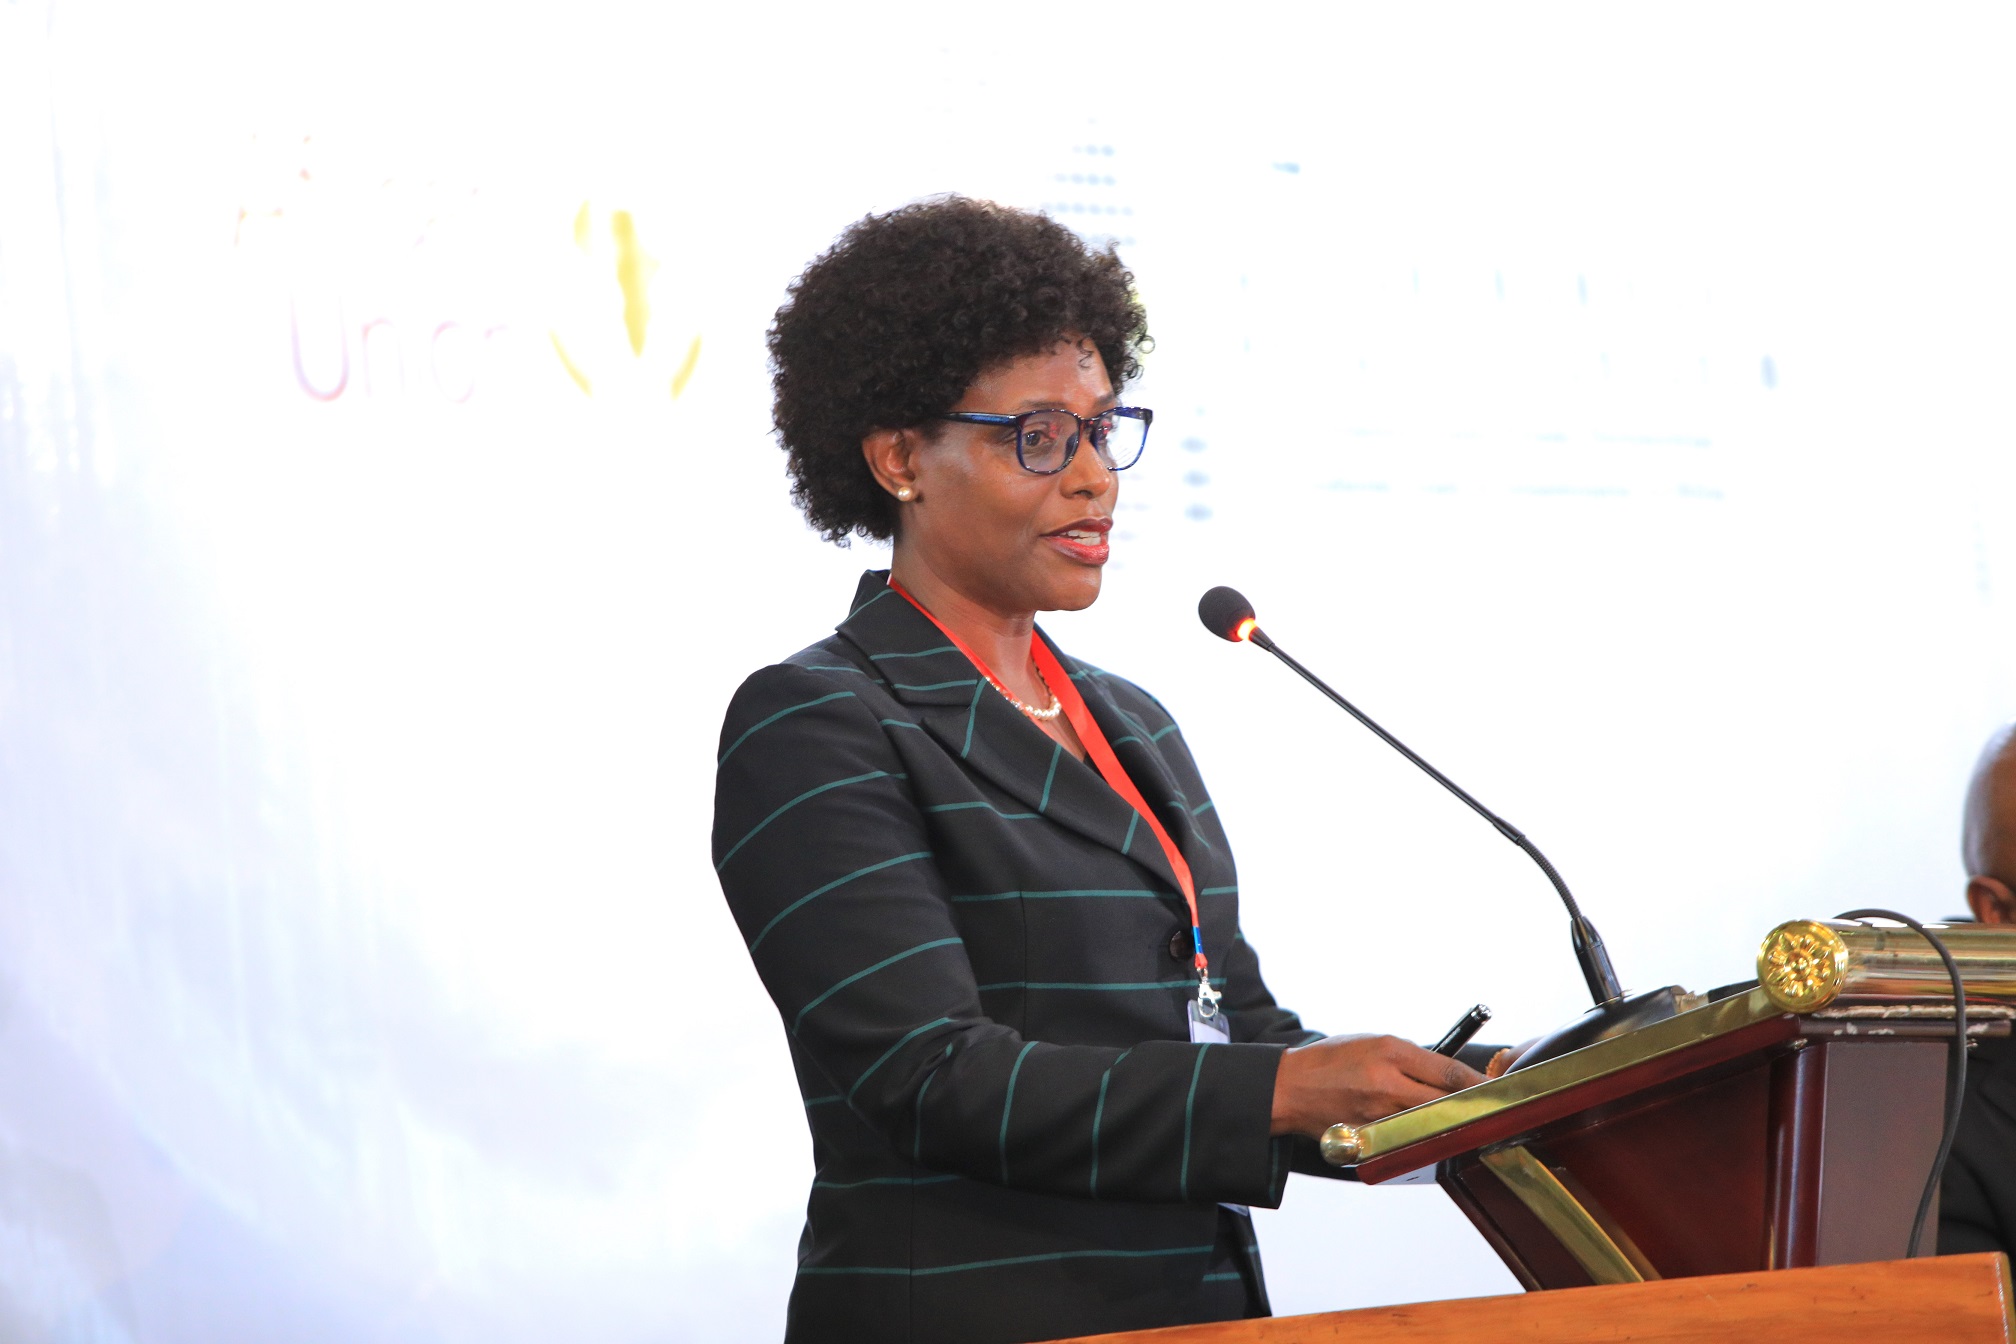 The EAC Deputy Secretary General in charge of Customs, Trade and Monetary Affairs, Ms. Annette Ssemuwumba speaks during the launch of the One Stop Border Post Performance Measurement Tool in Nairobi, Kenya. Ms. Ssemuwumba announced that the tool is already operational.